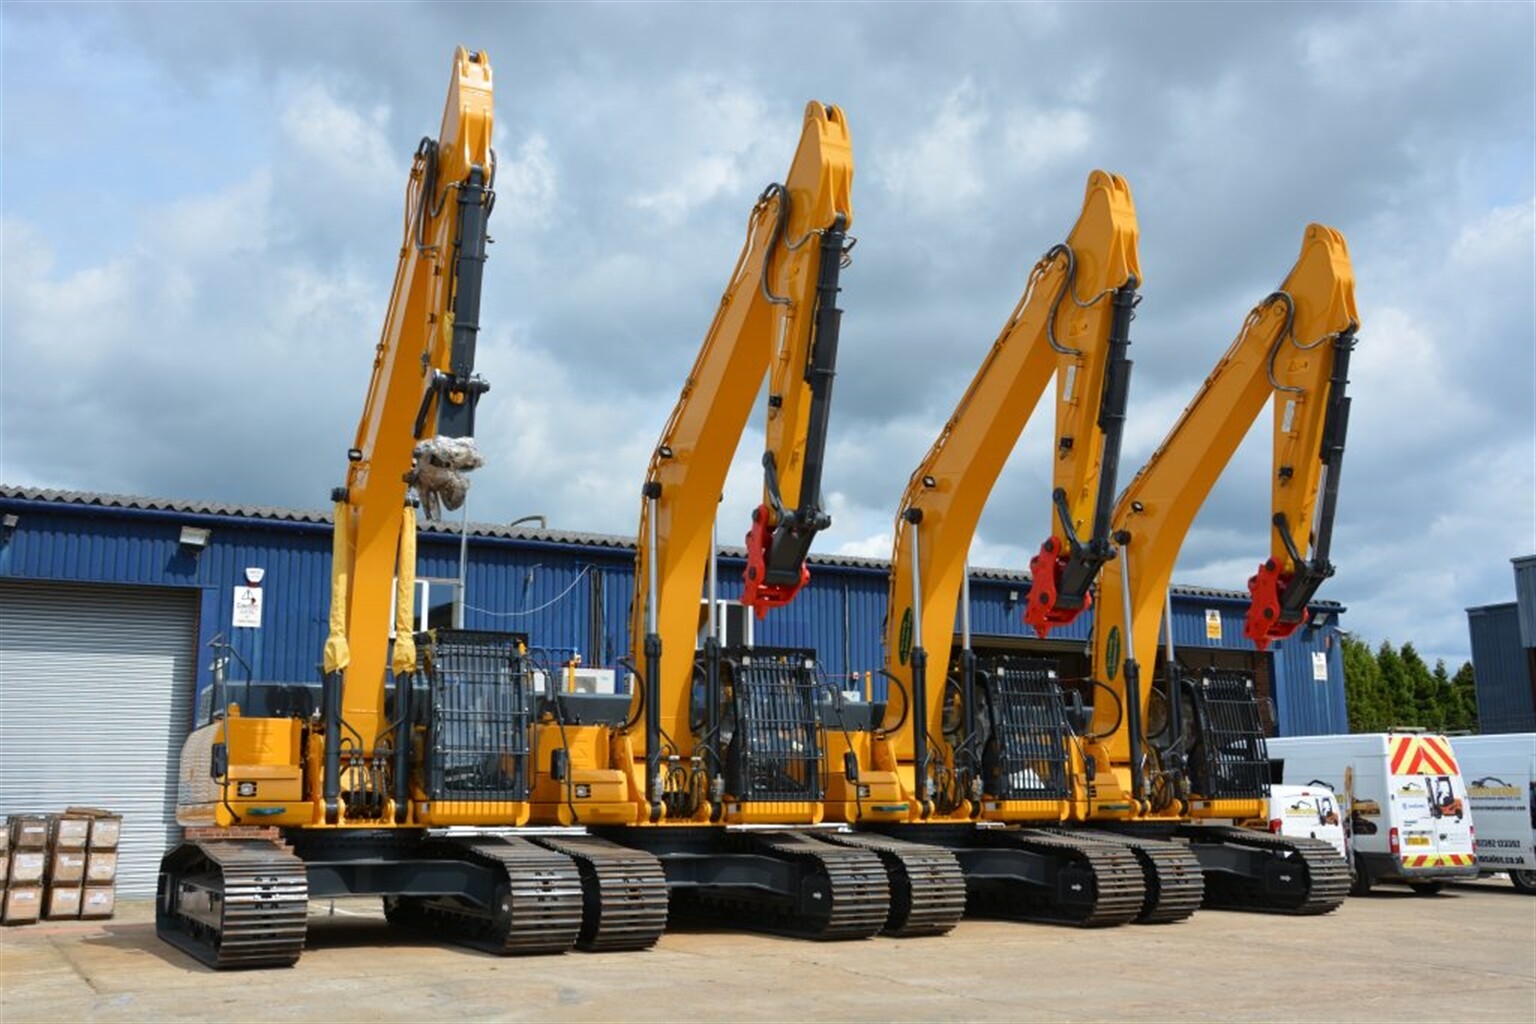 LiuGong to acquire Construction Plant & Machinery Sales (southeast) Limited